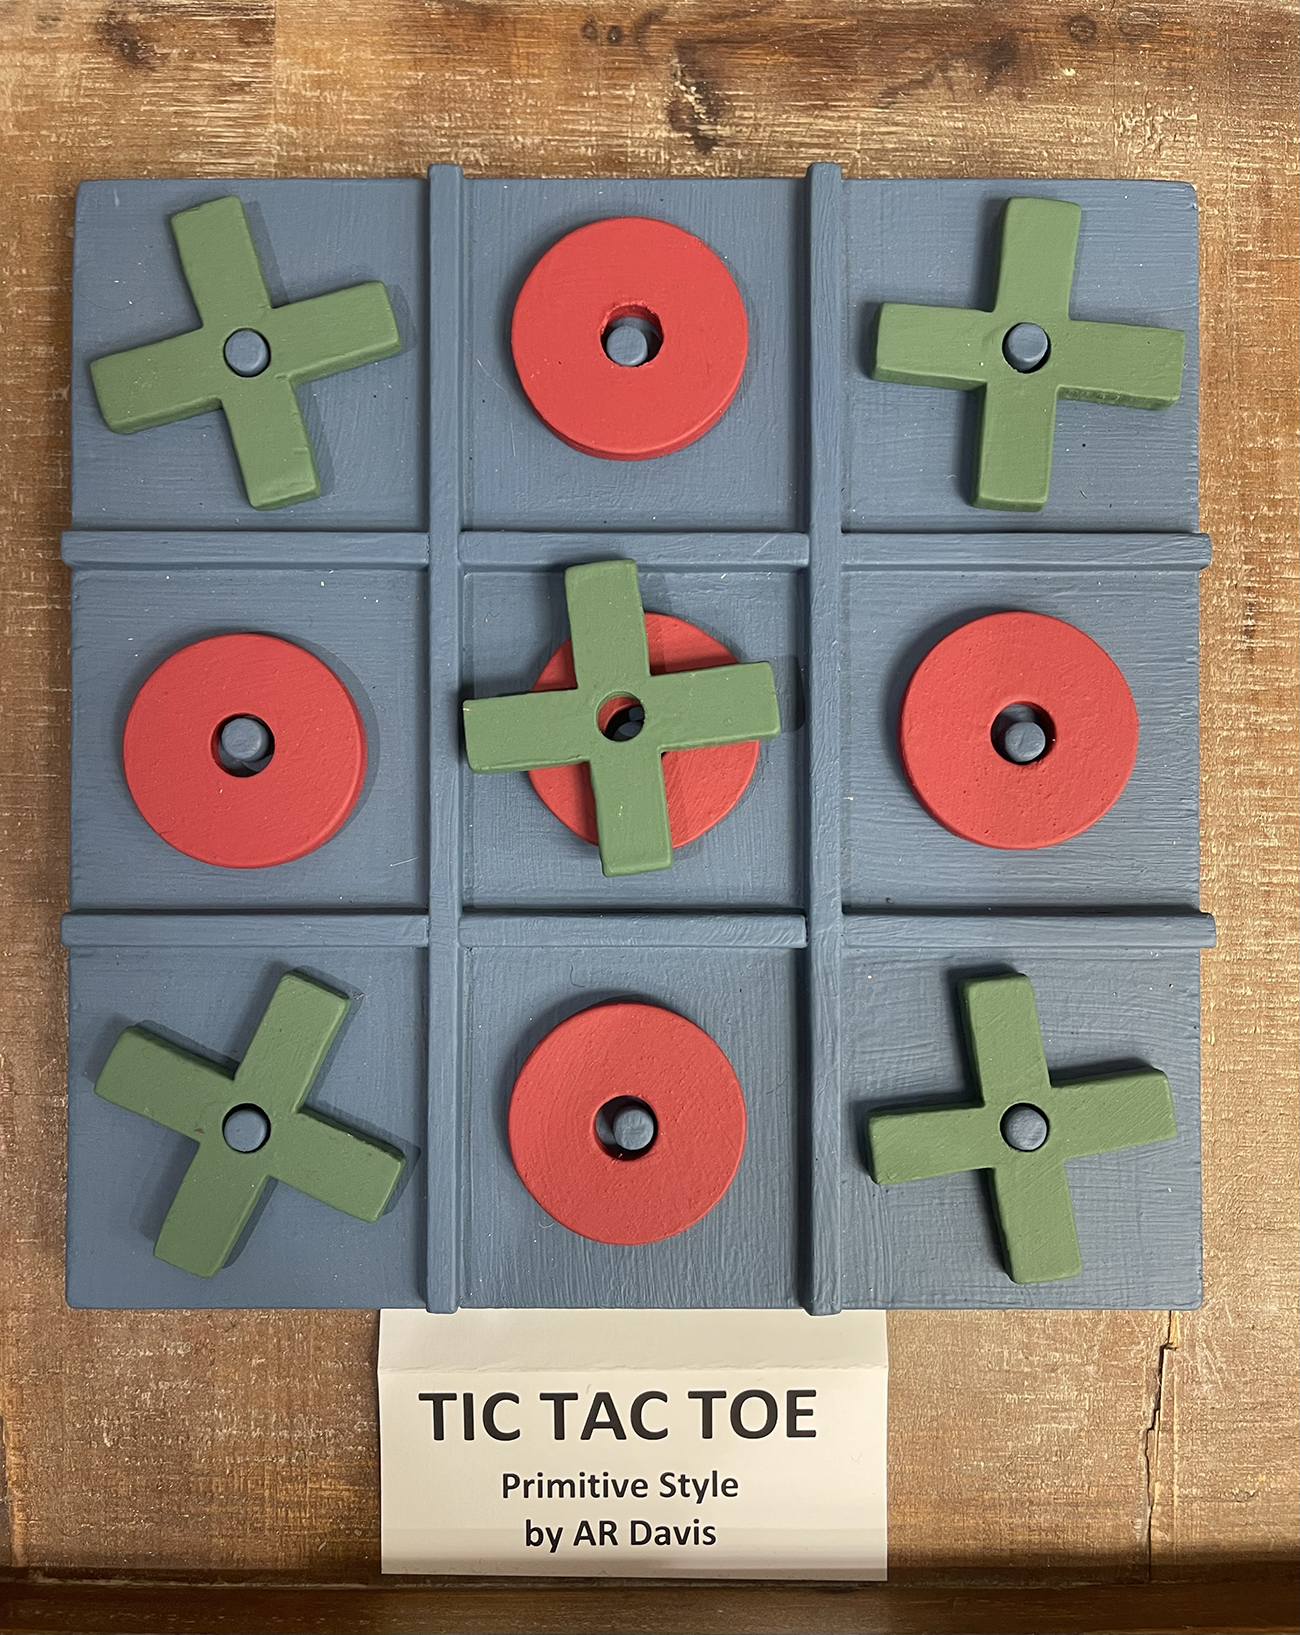 HANDCRAFTED WOODEN TIC-TAC-TOE